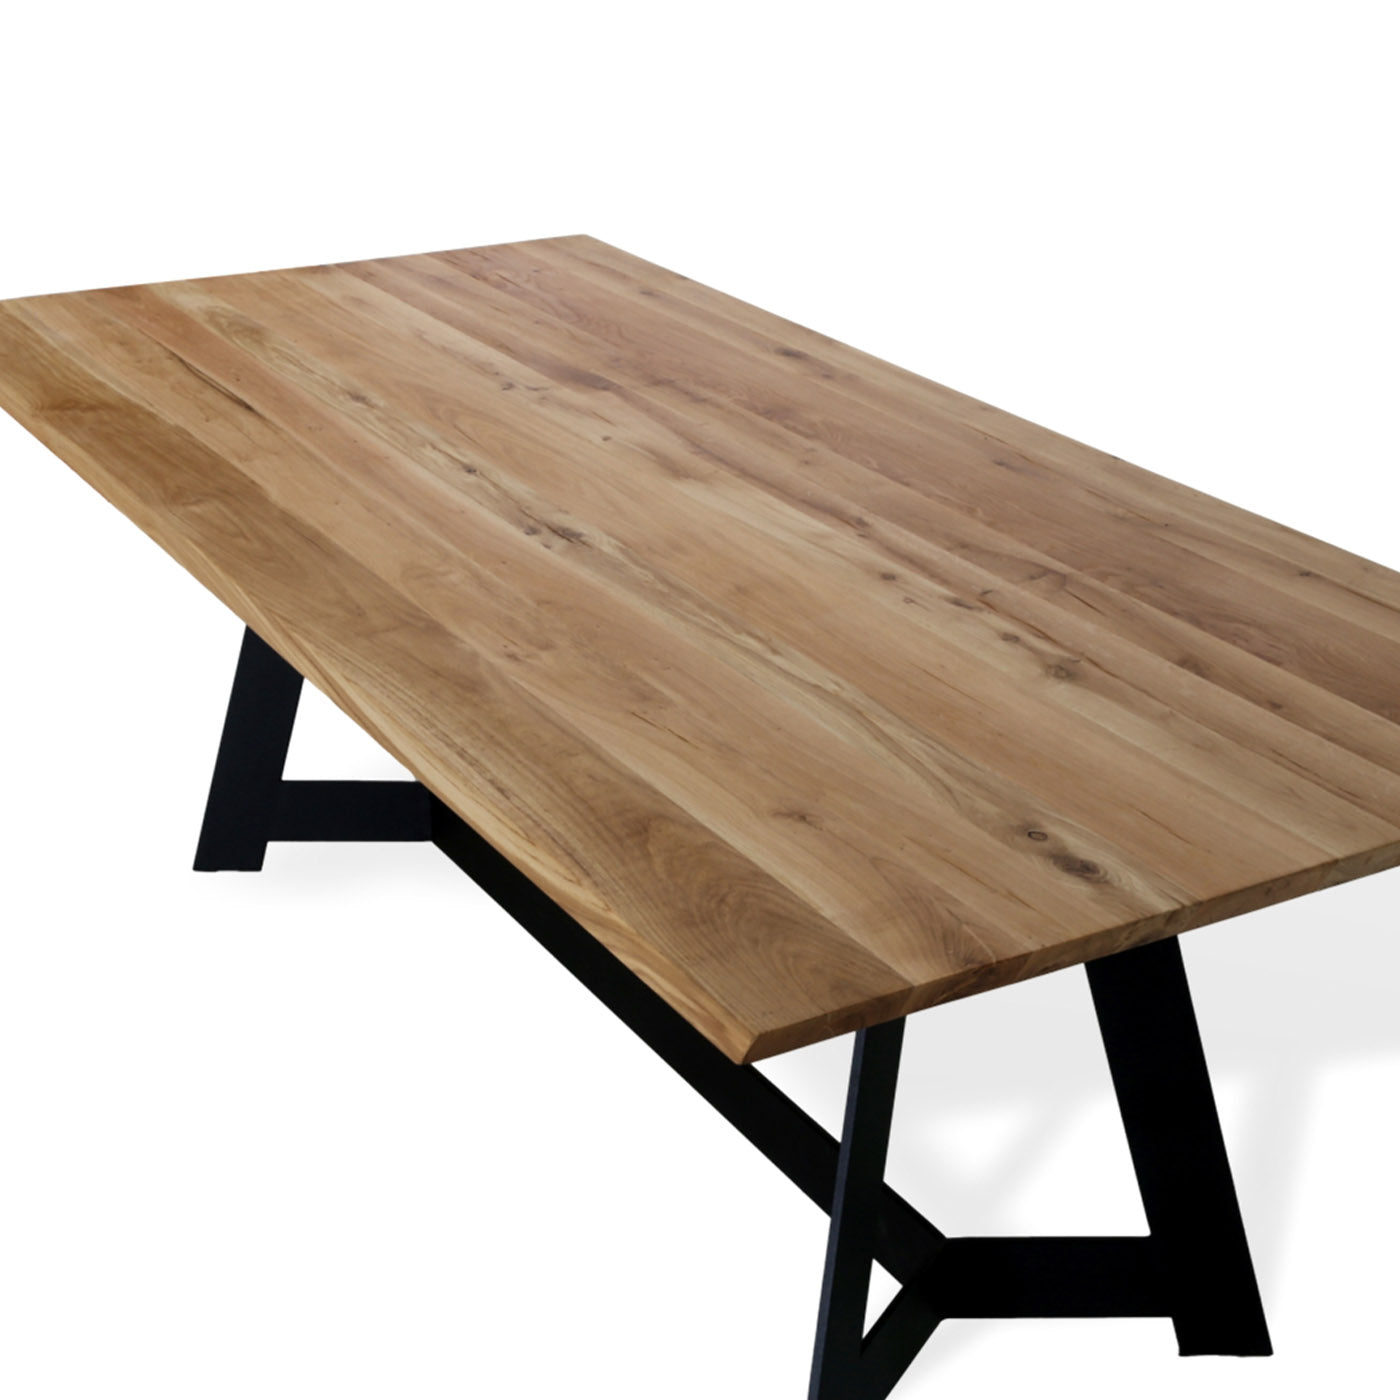 Durmast and Metal Rectangular Dining Table - Alternative view 2